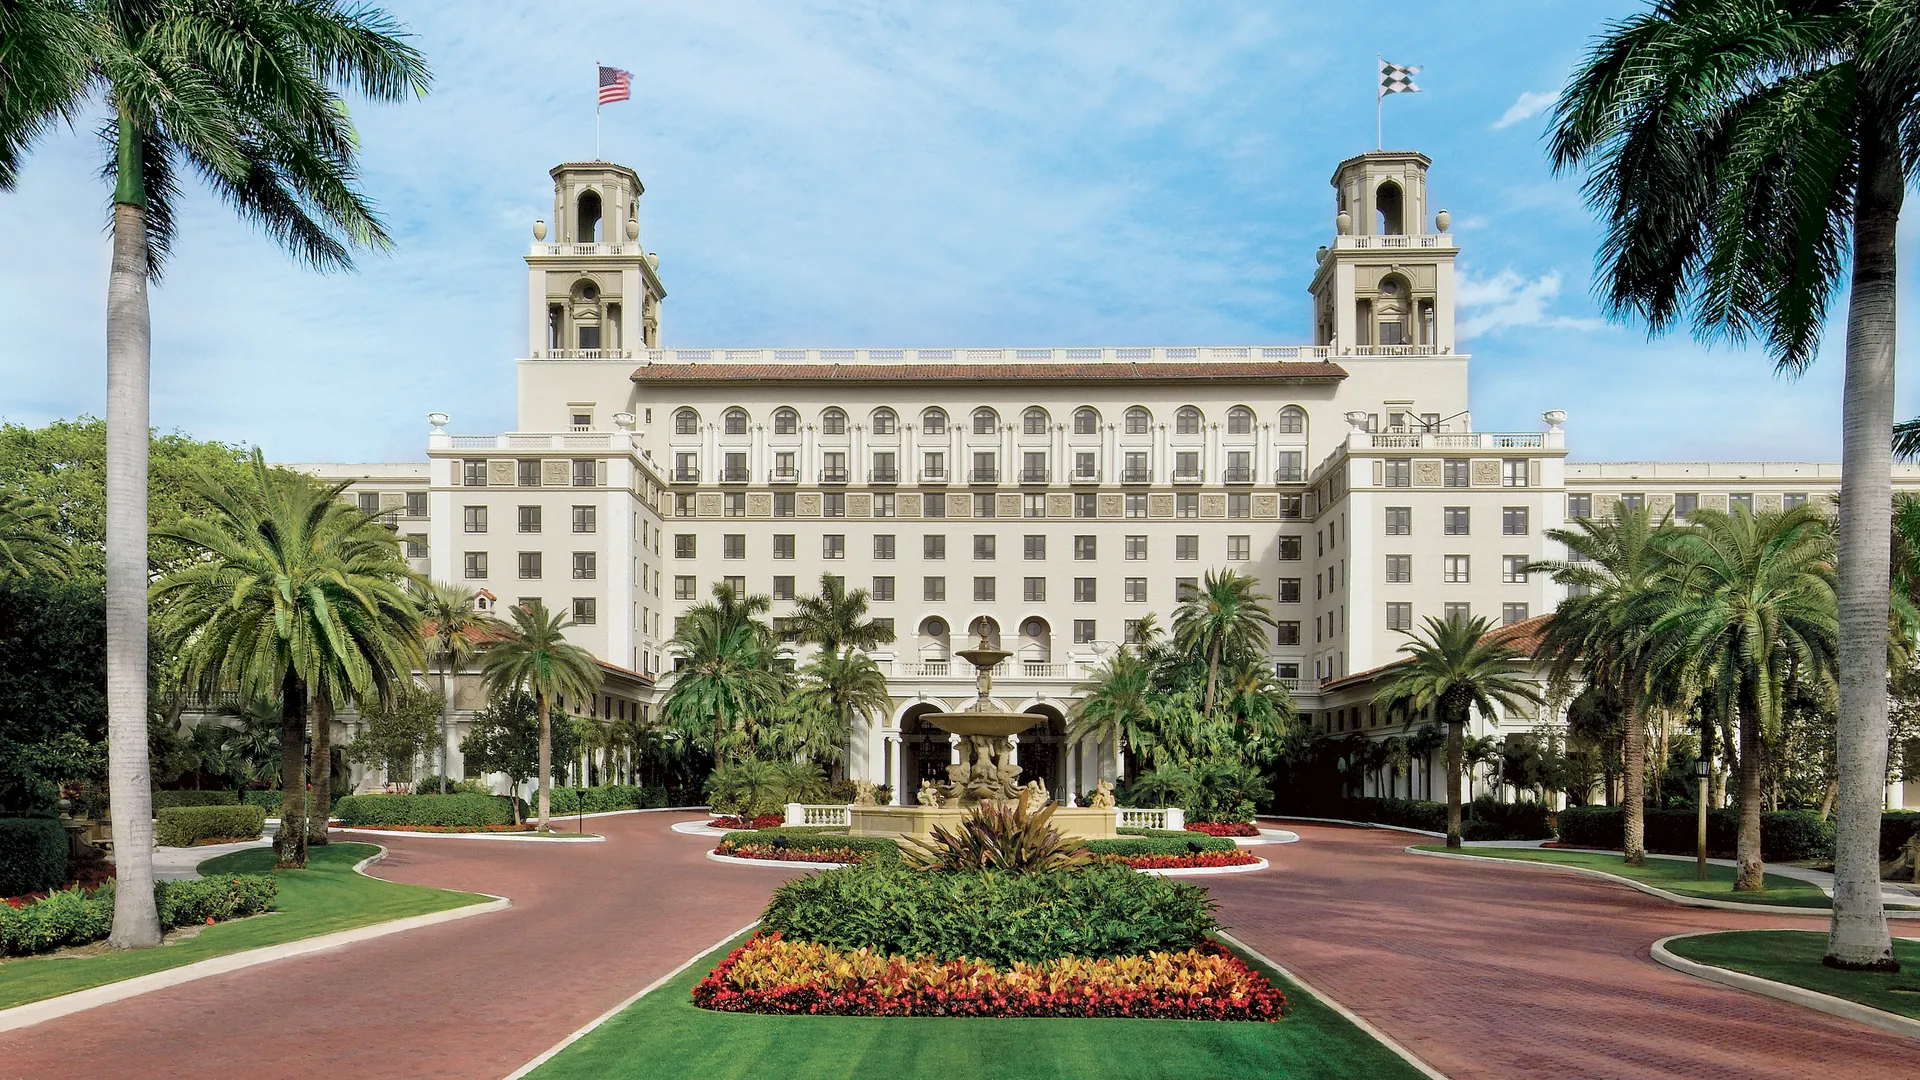 The Sunday Champagne Brunch at The Breakers: A Lavish Brunch Experience in Palm Beach